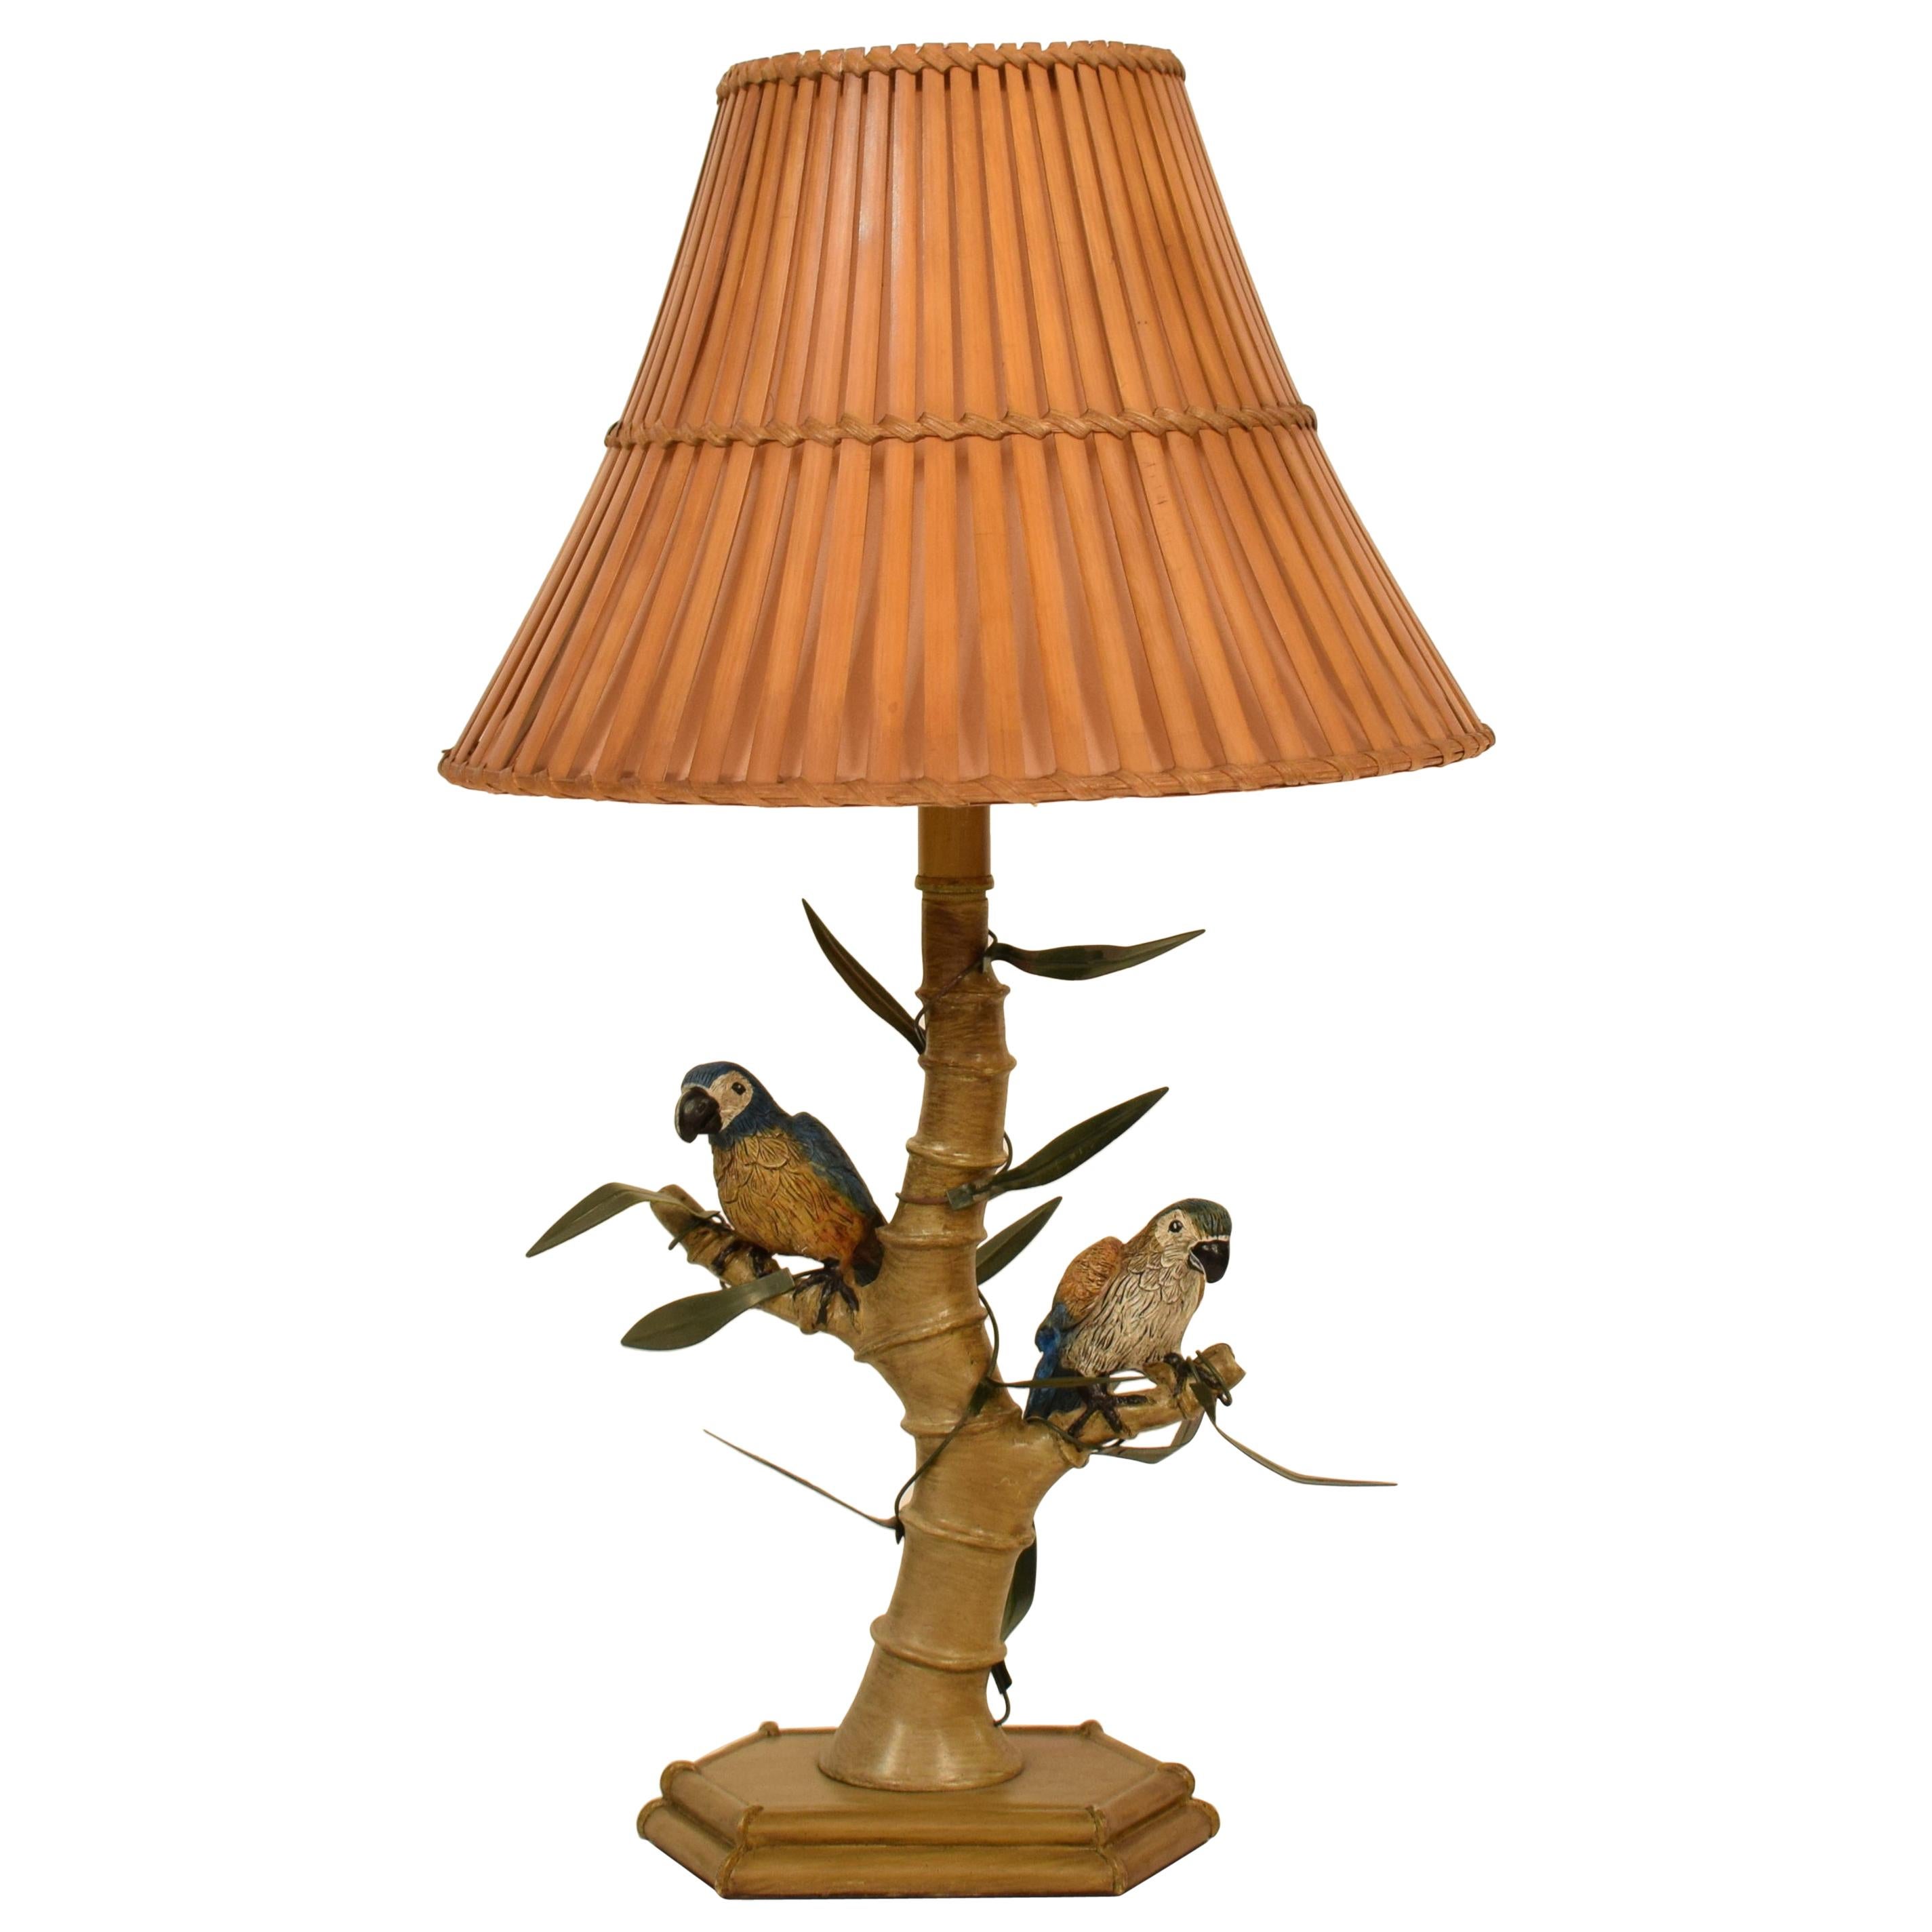 Midcentury Italian Faux Bamboo Table Lamp with Parrots and Bamboo Lamp Shade